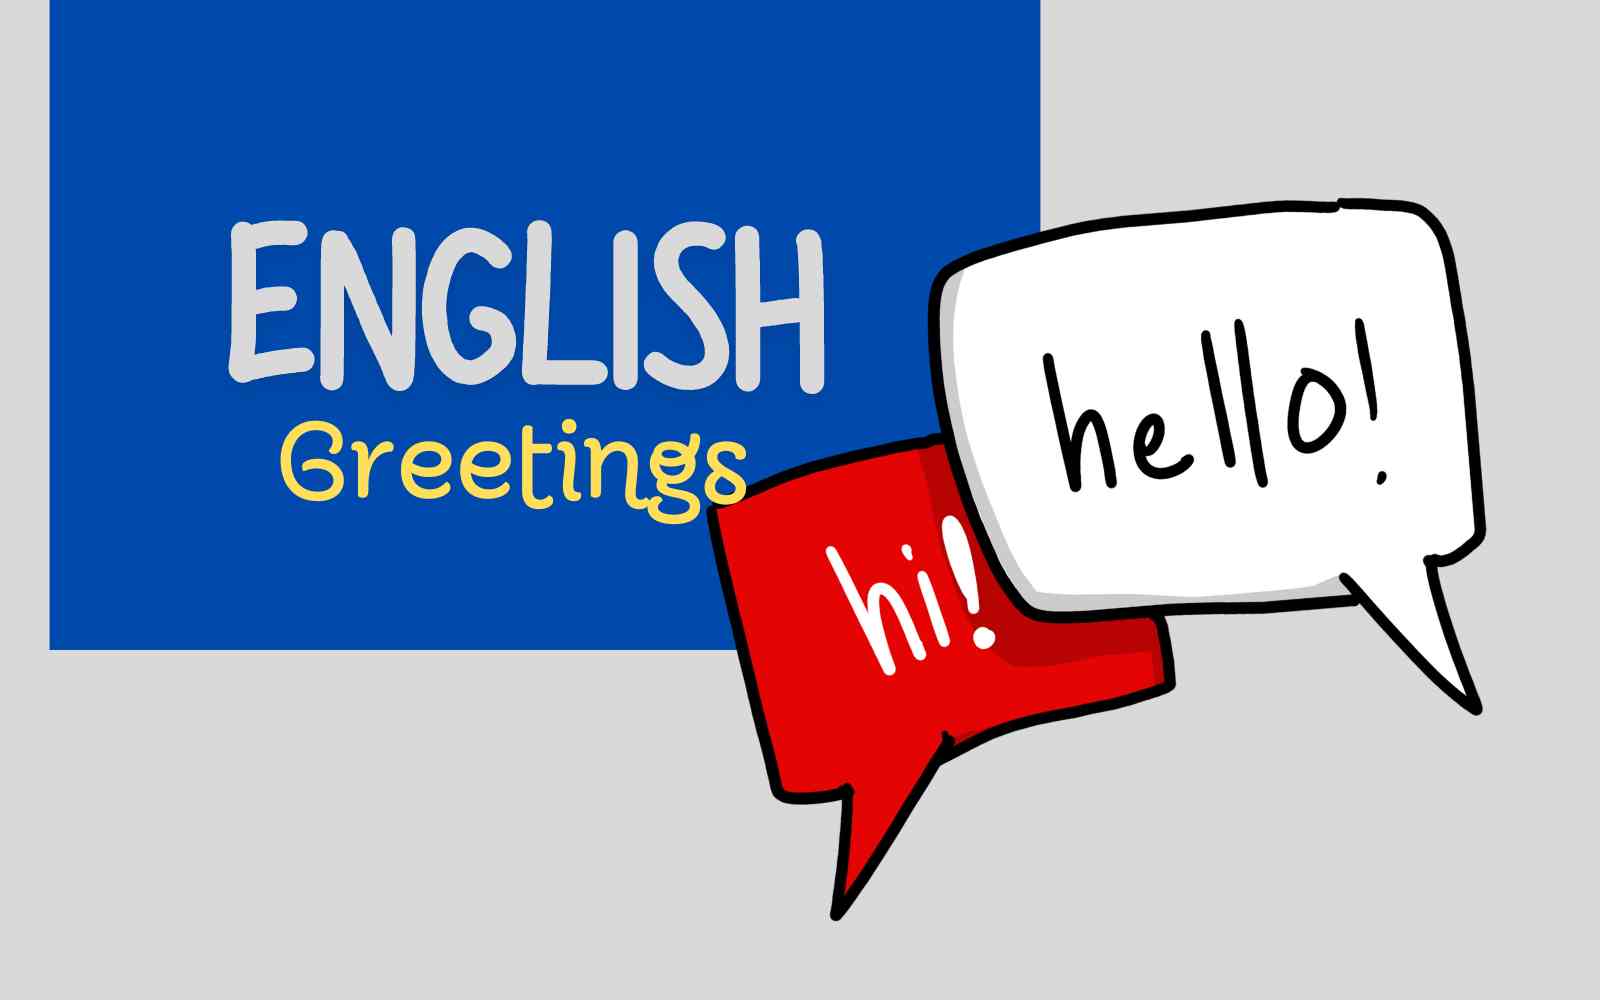 Greetings - Learn English expressions and slang